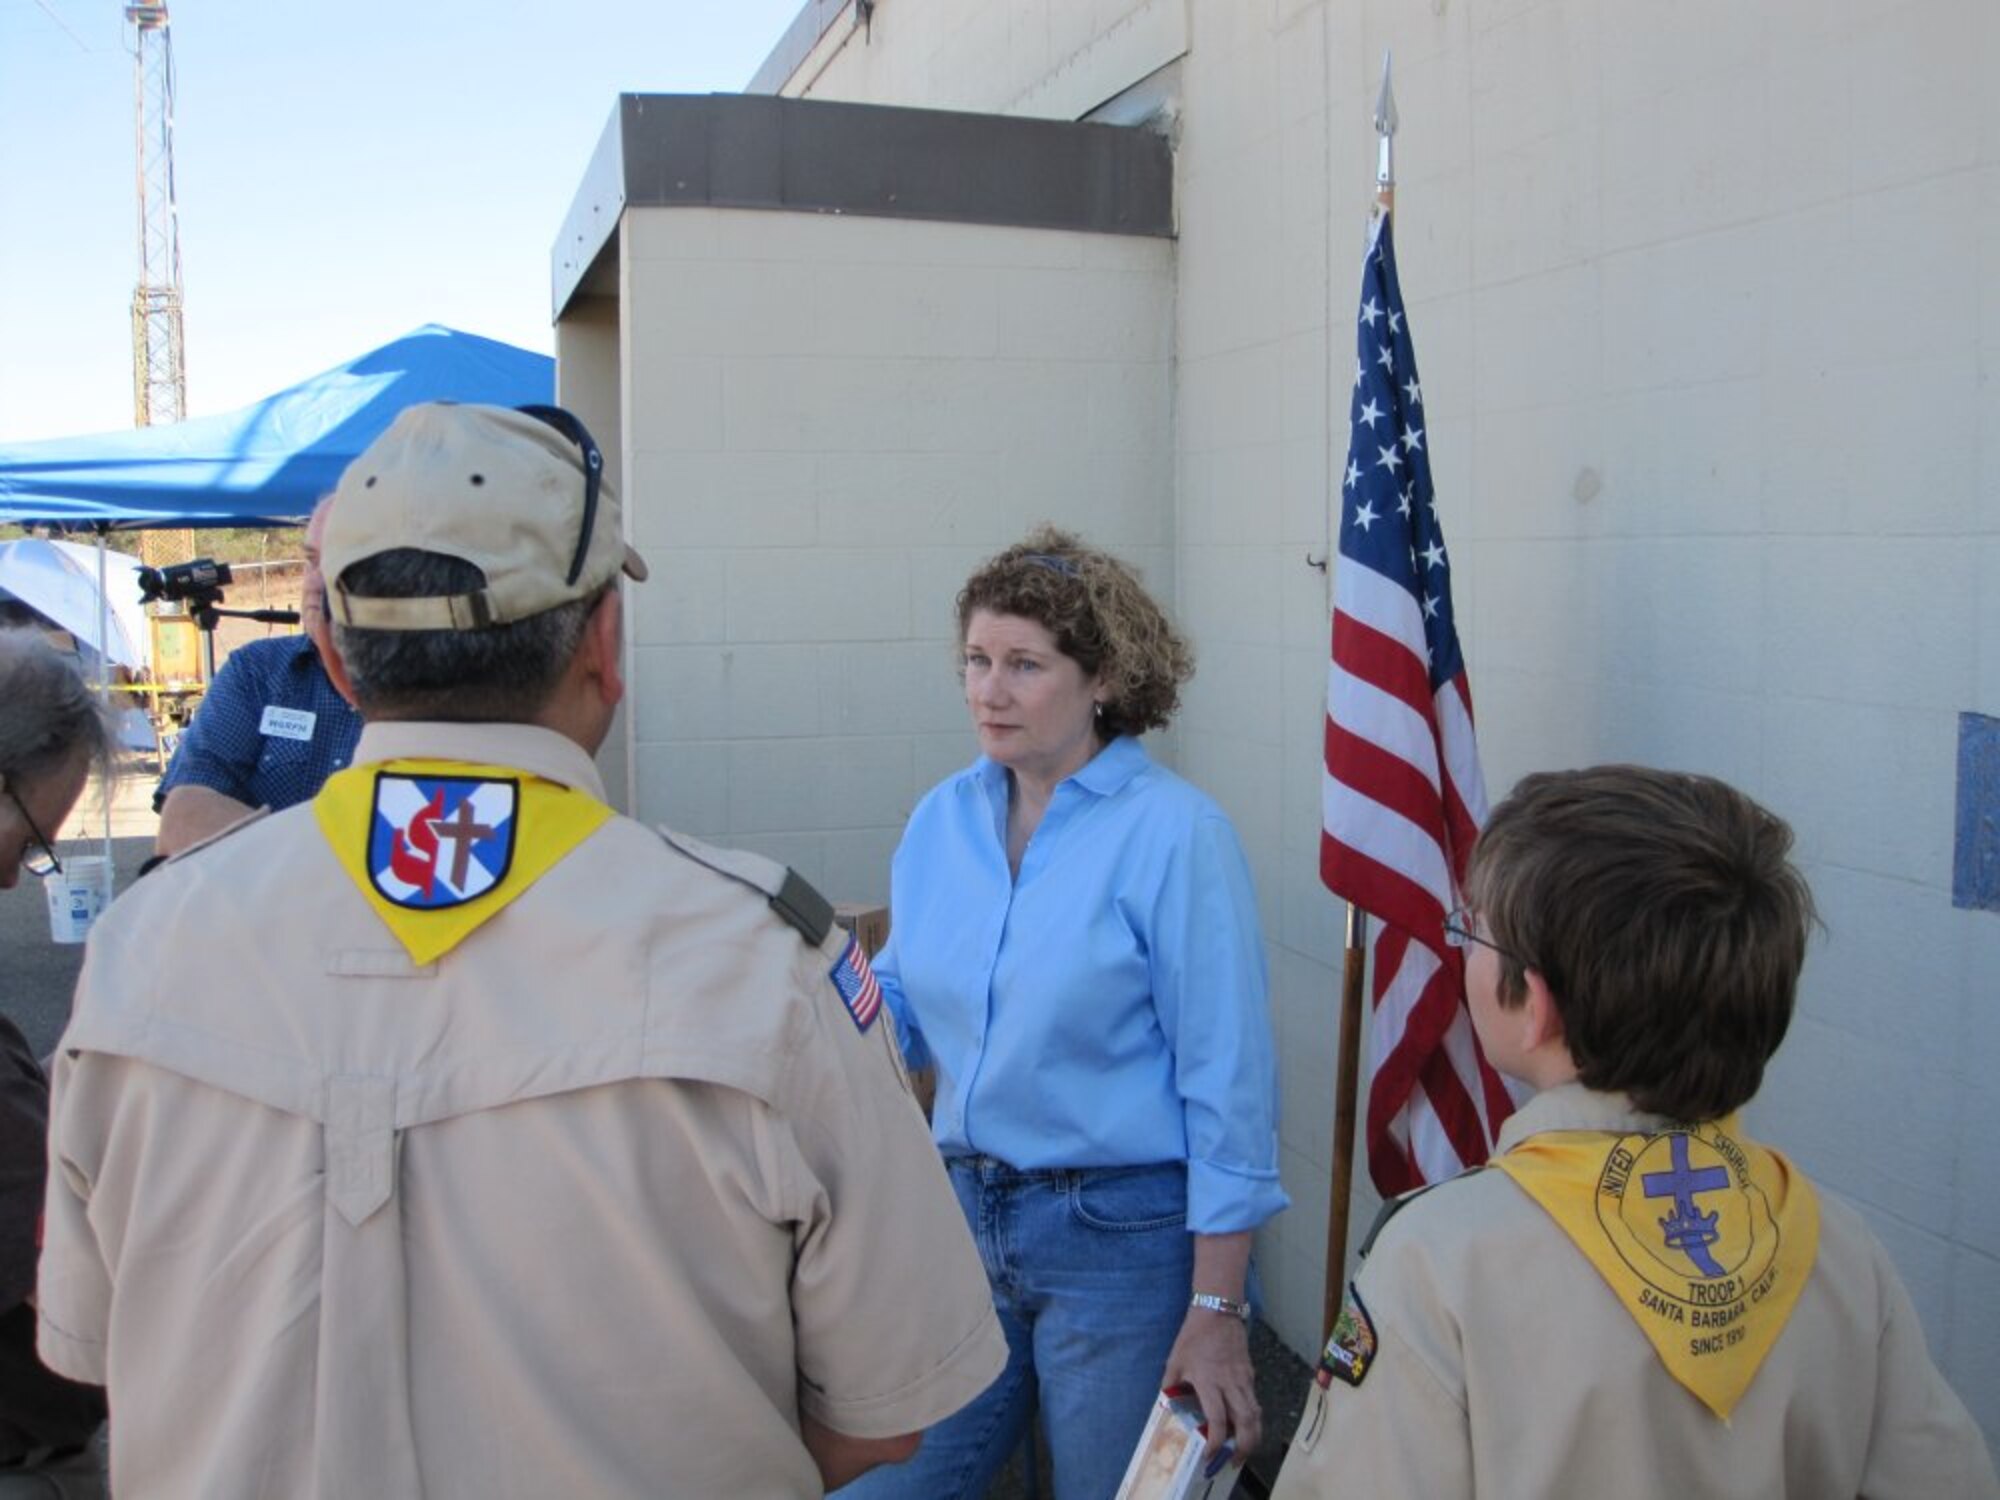 Lt. Gen. Susan J. Helms, the 14th Air Force commander, chats with Vandenberg Boy Scouts and signs autographs during the Satellite Amateur Radio Club's annual  boy  scout  jamboree on the  air at Vandenberg Oct. 18 to 20. This event allows scouts to chat with other scouts in countries around the world, as well as within the United States.  (courtesy photo by Eric Lemmon)